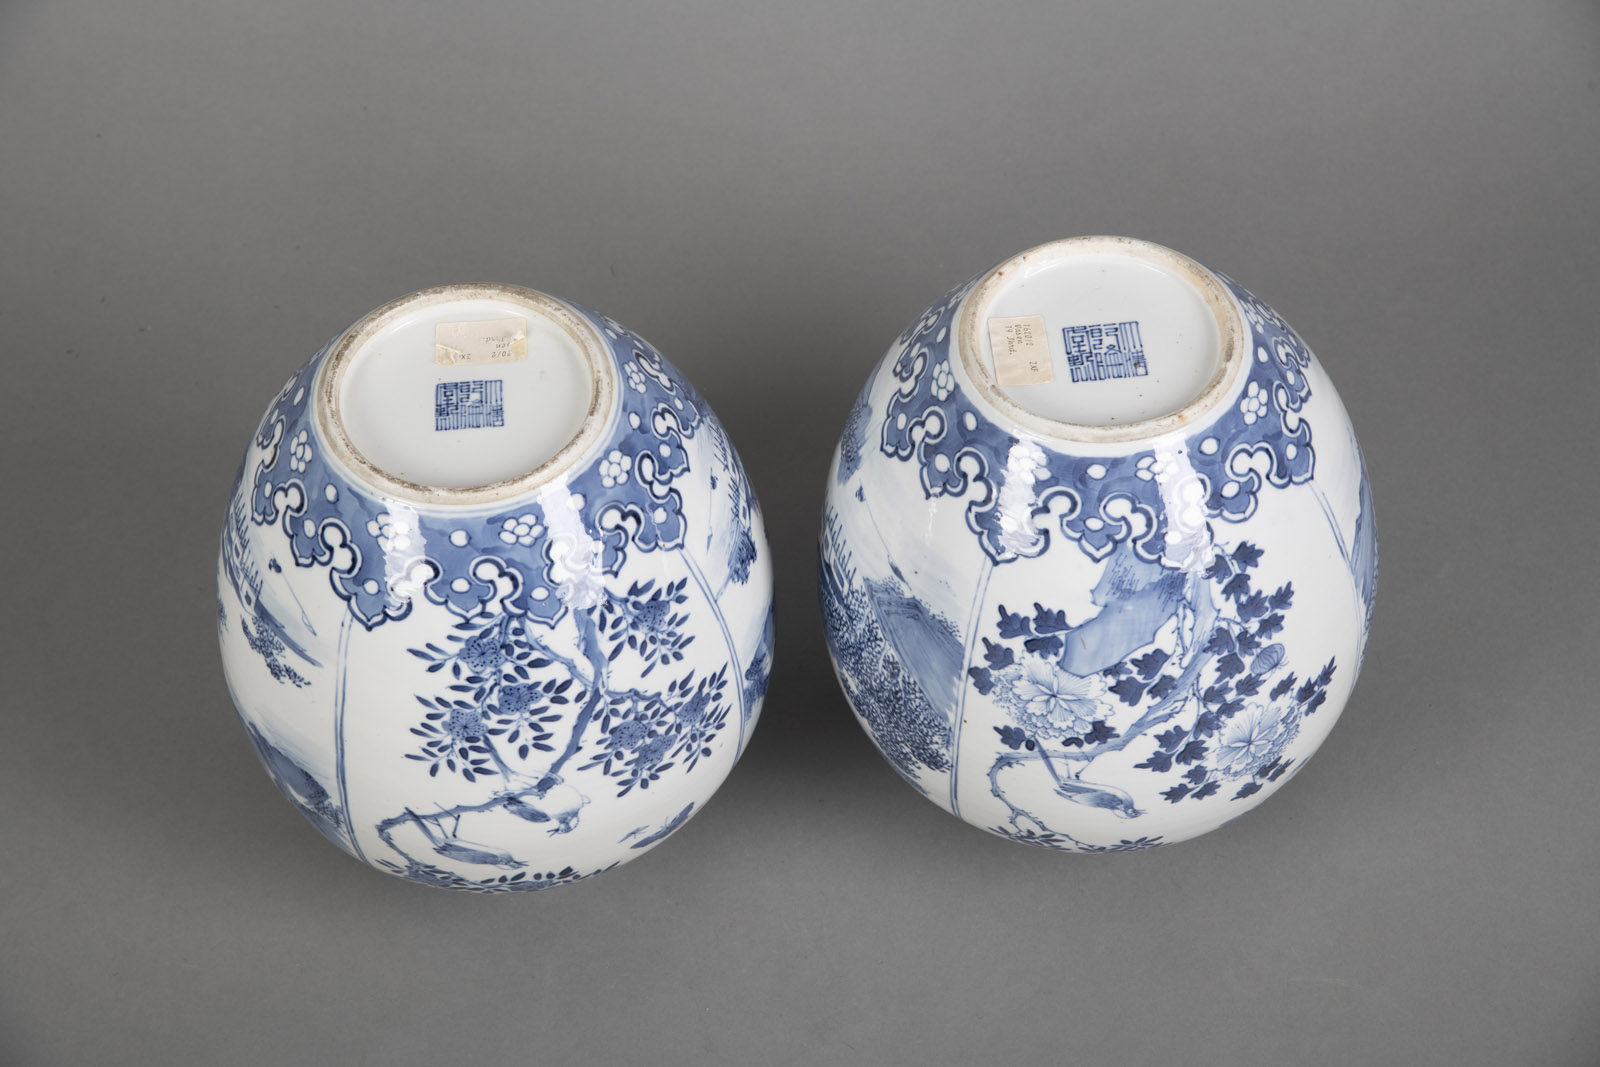 A PAIR OF BLUE AND WHITE LANDSCAPE AND FLORAL PORCELAIN VASES - Image 4 of 4